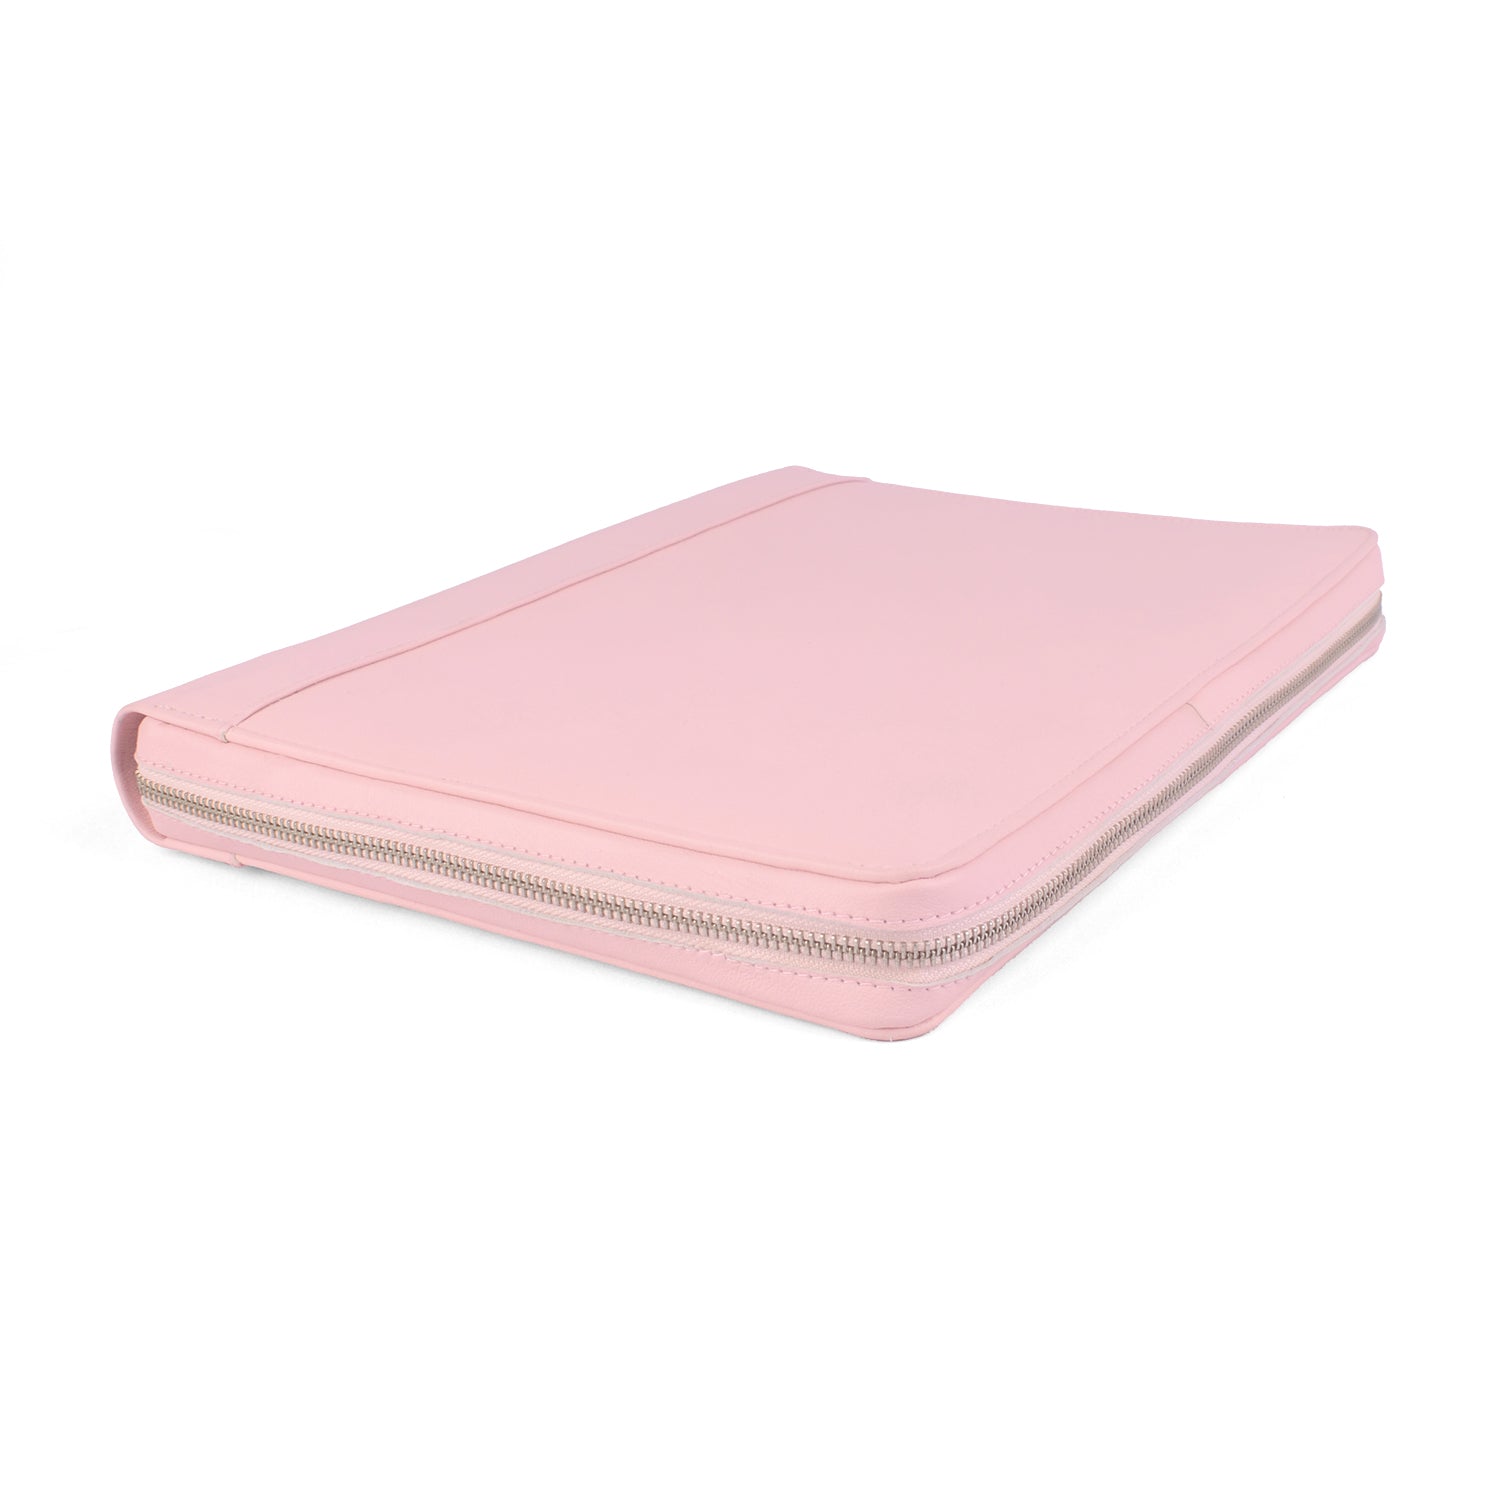 Case-It The Classic 2 Zipper Binder with Strap, Pink - Shop